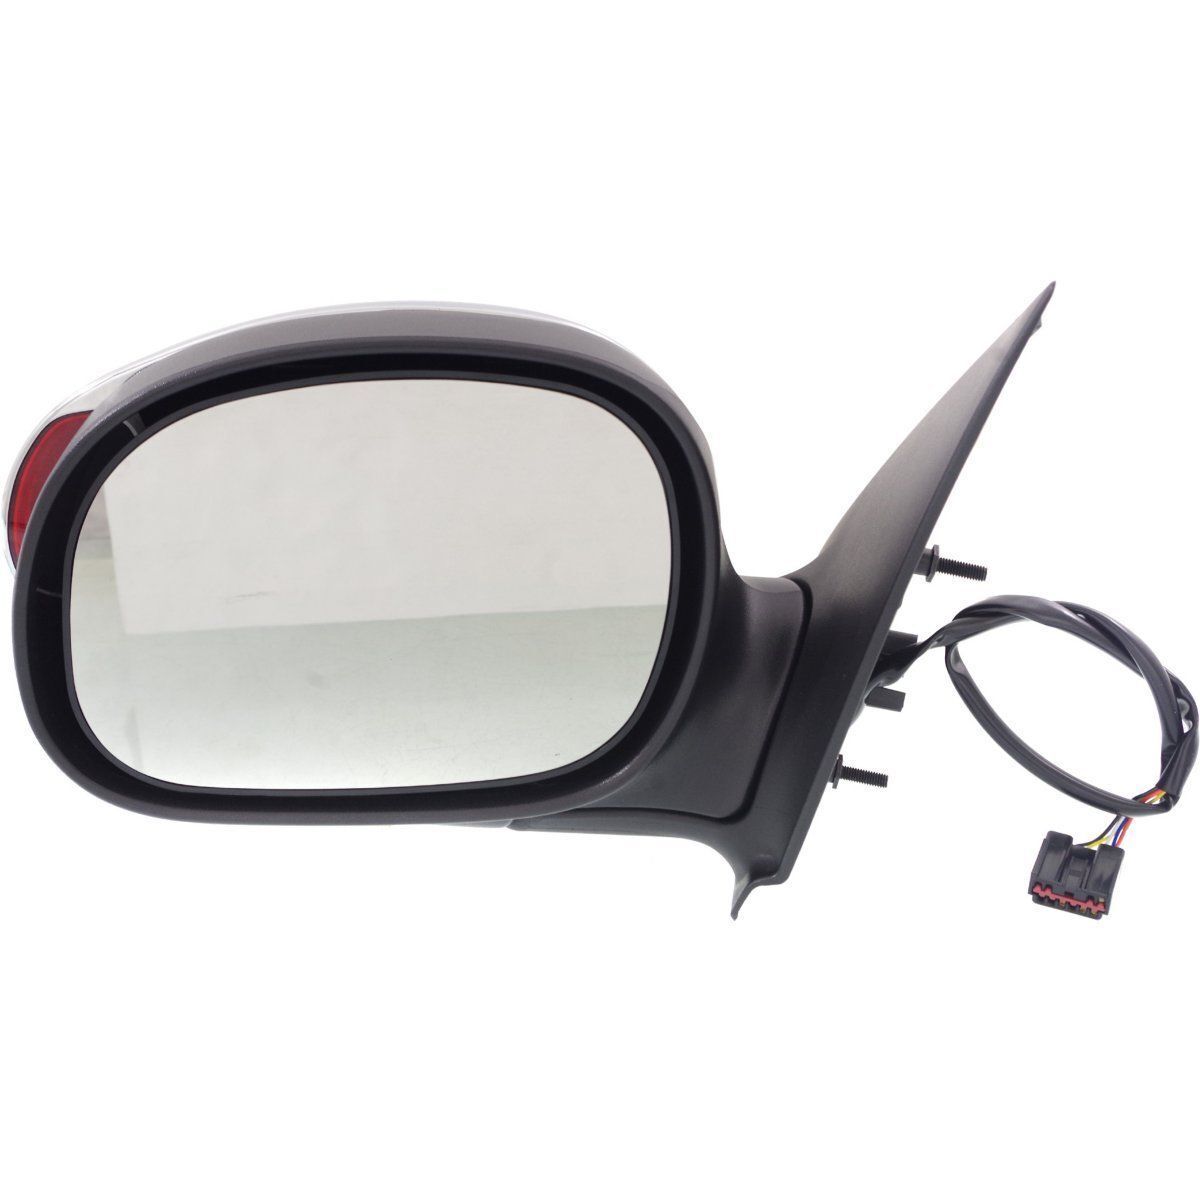 Kool Vue Power Mirror For 97-2003 Ford F-150 97-99 F-250 Driver Side